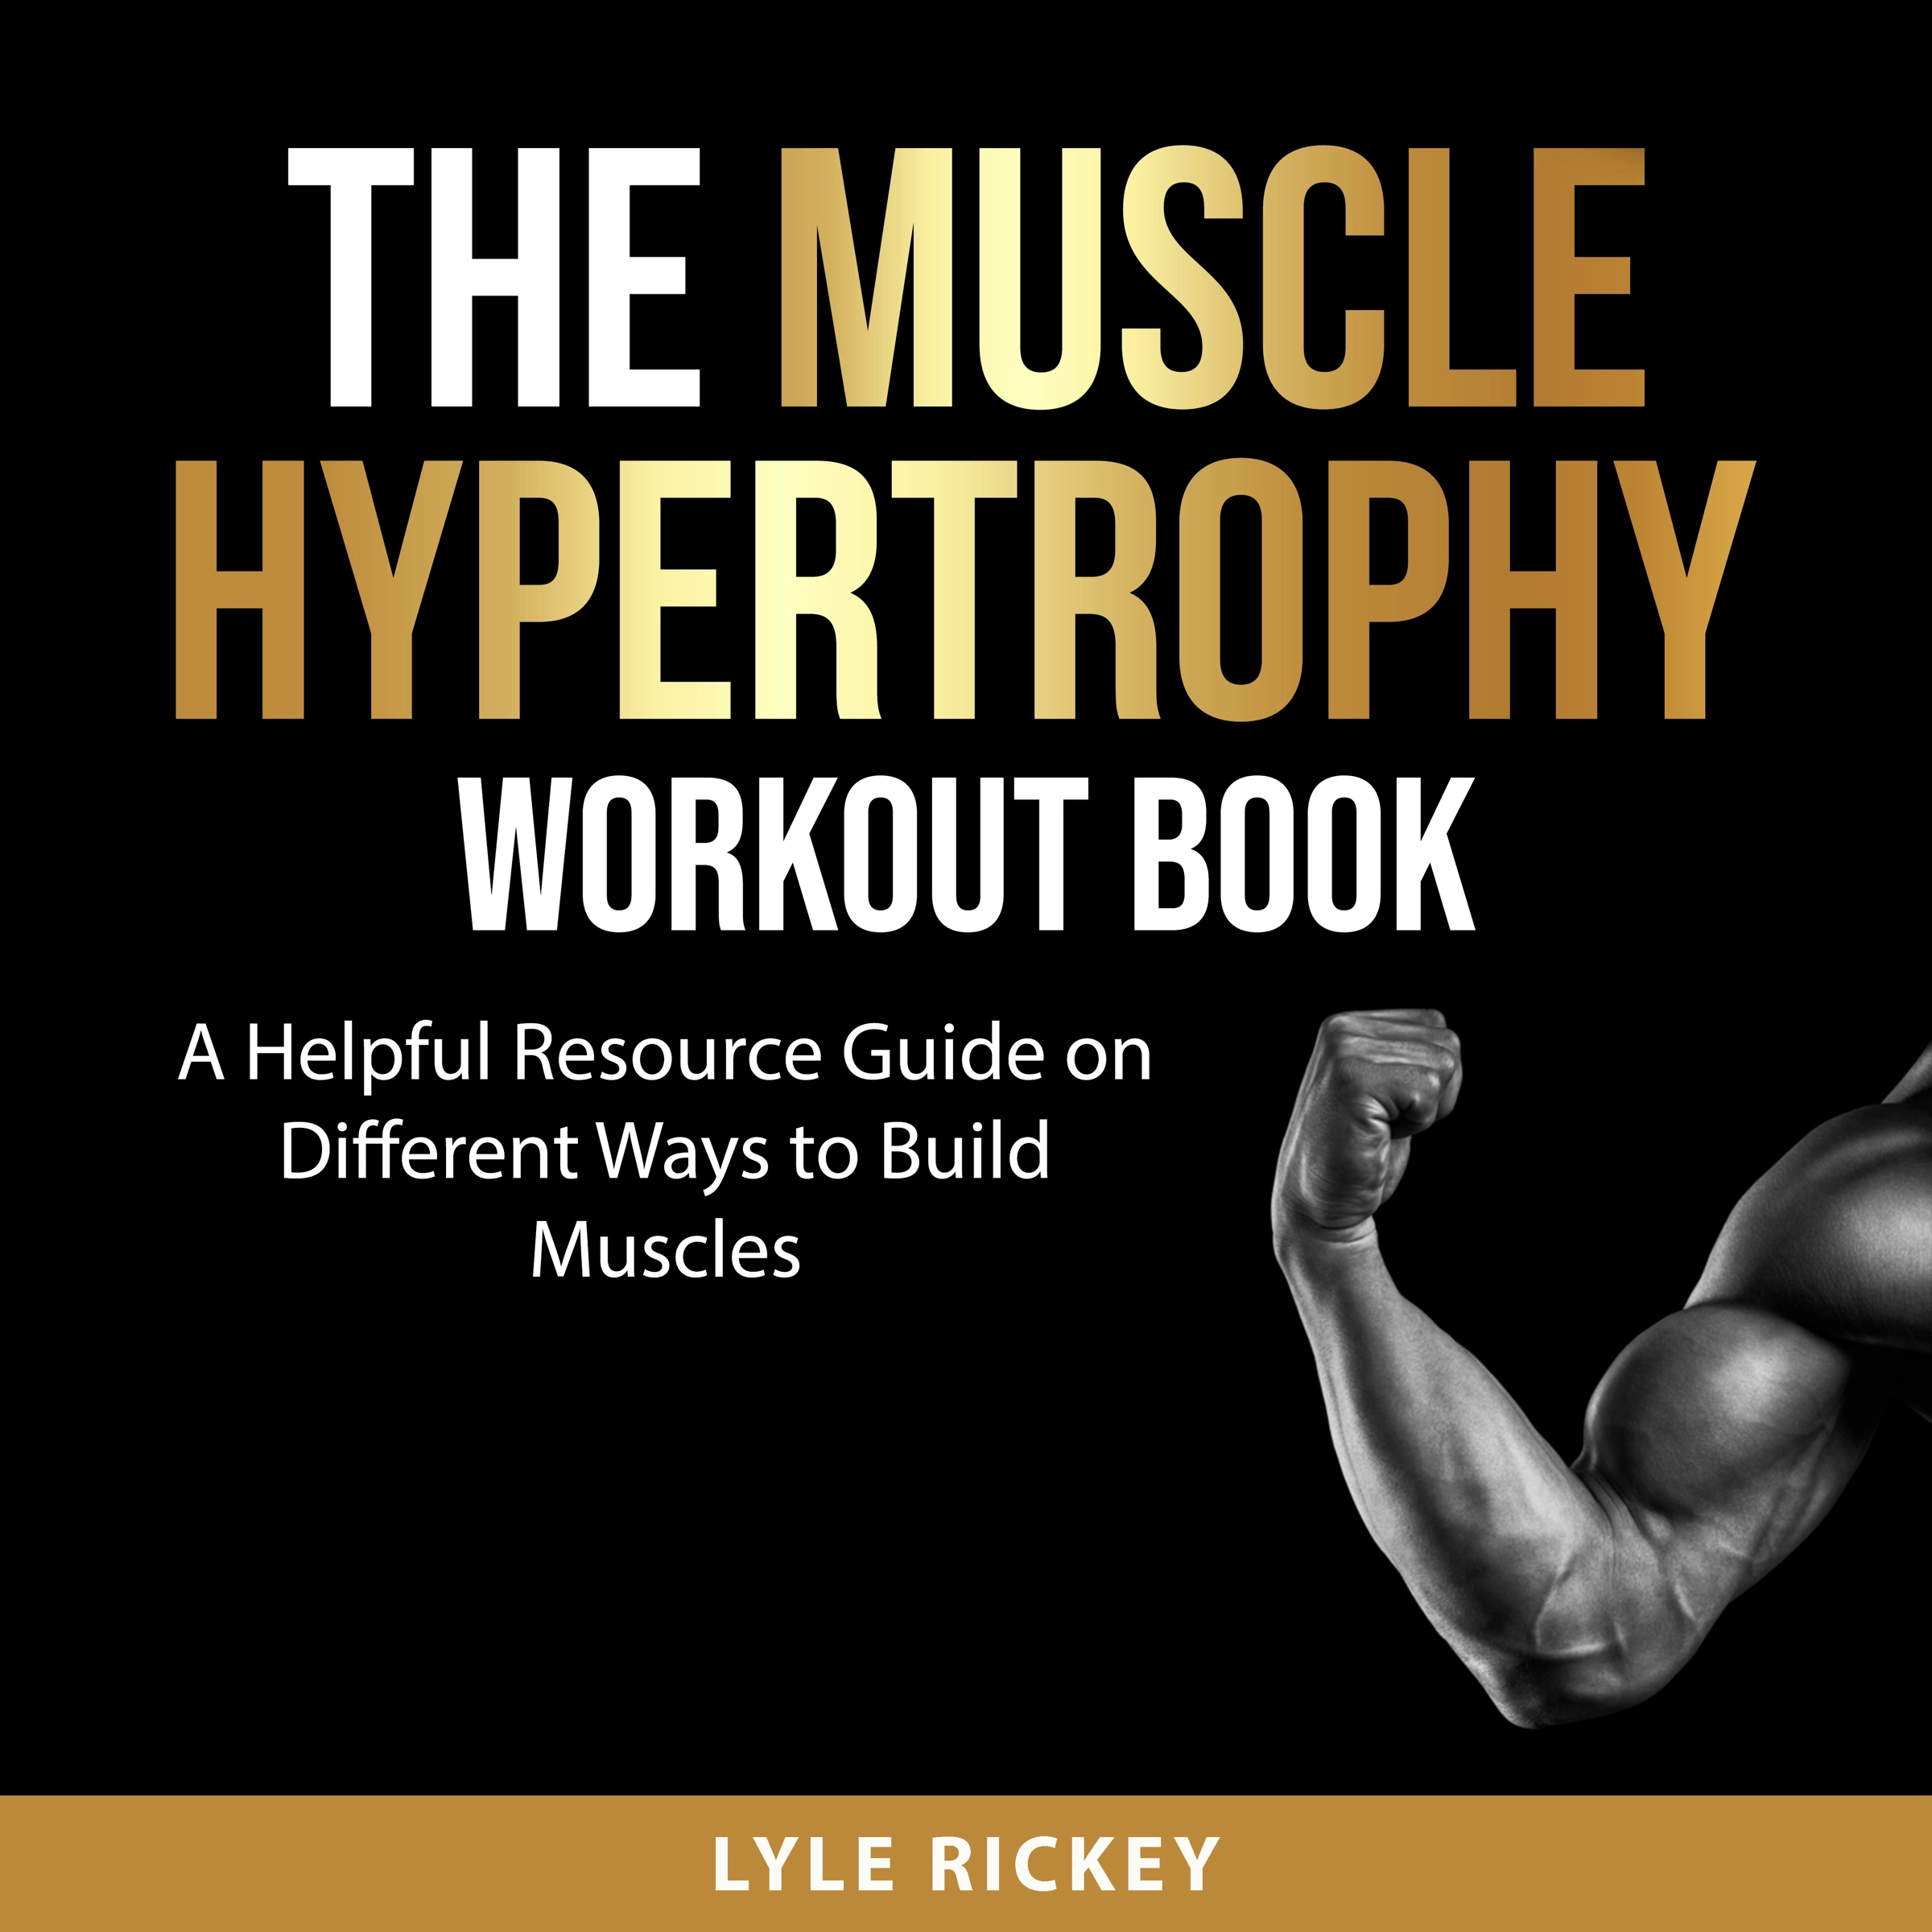 The Muscle Hypertrophy Workout Book by Lyle Rickey Audiobook